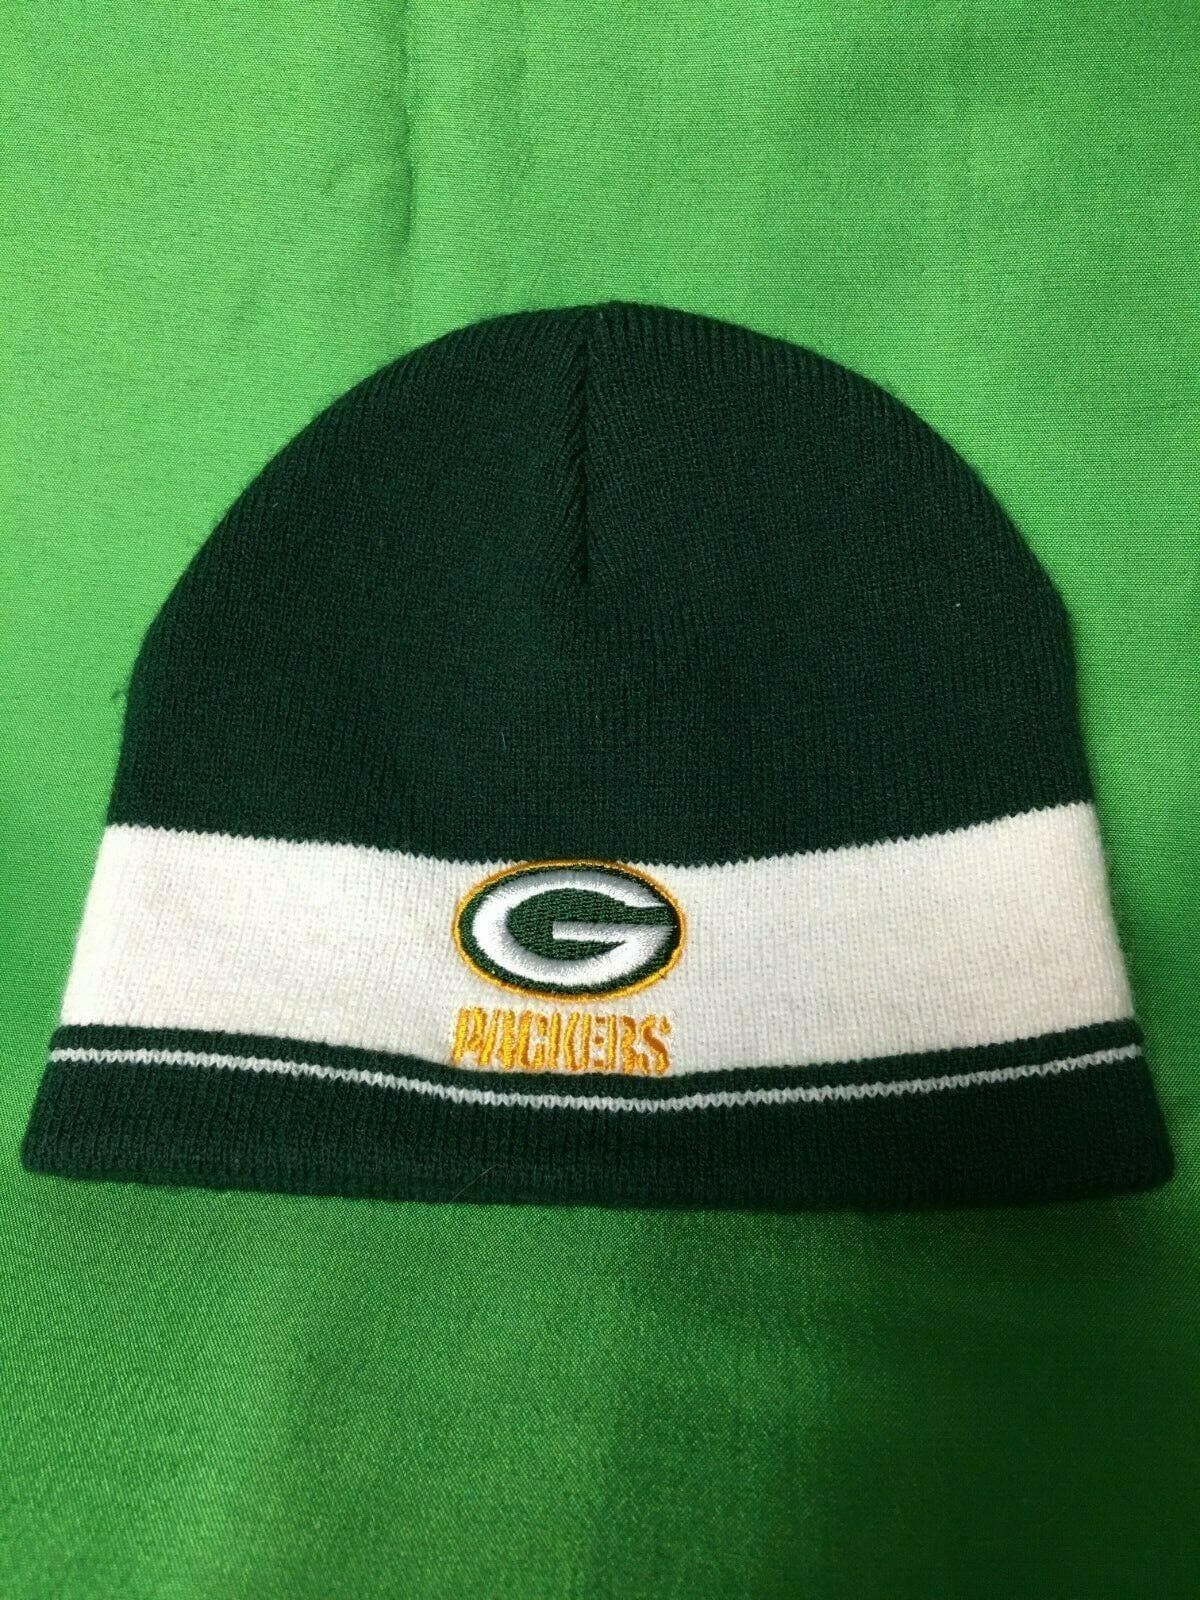 NFL Green Bay Packers Beanie Youth X-Small/Small 4-8